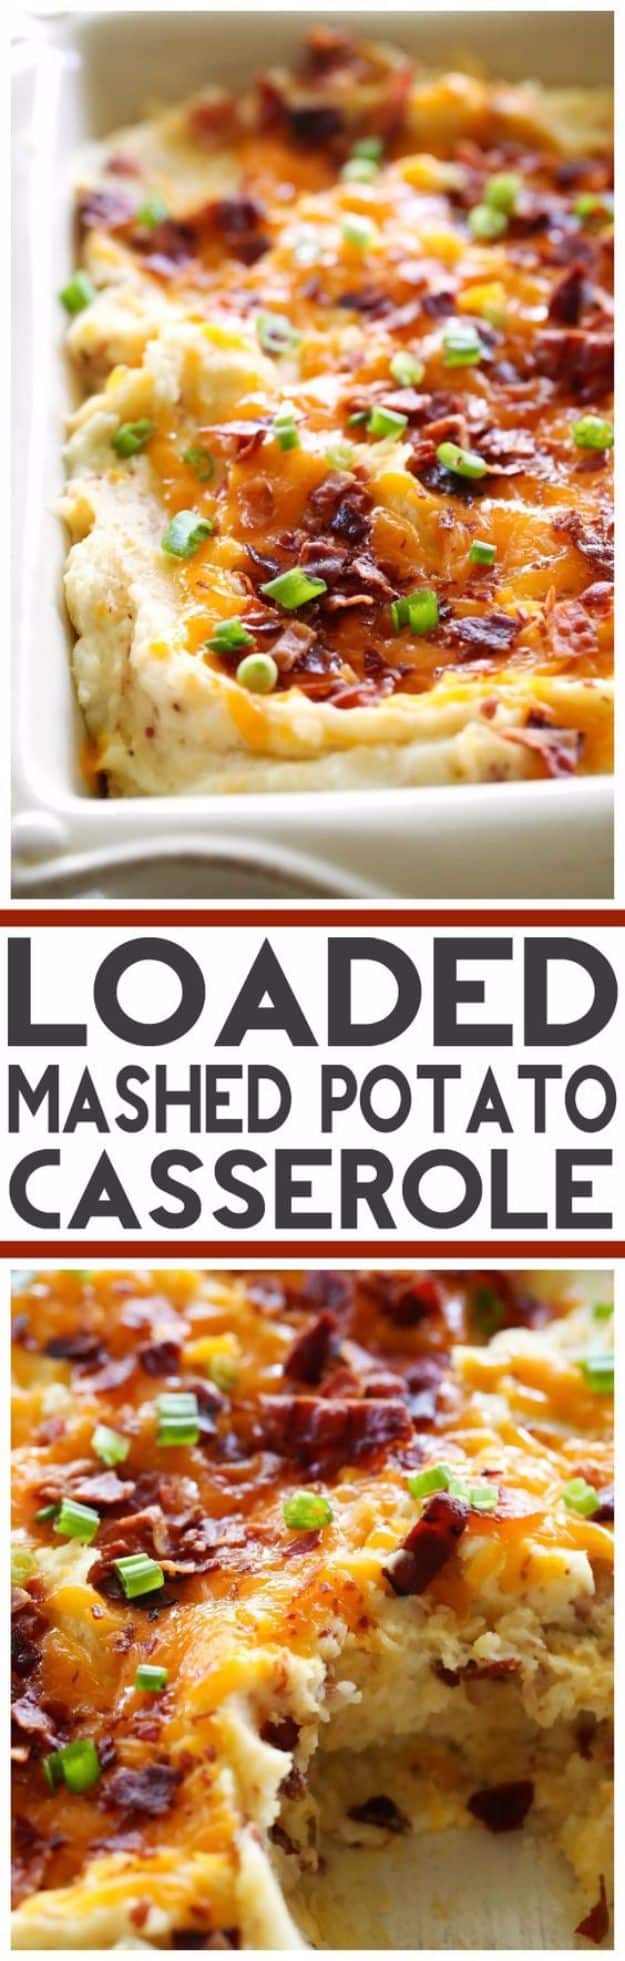 Best Easter Dinner Recipes - Loaded Mashed Potato Casserole - Easy Recipe Ideas for Easter Dinners and Holiday Meals for Families - Side Dishes, Slow Cooker Recipe Tutorials, Main Courses, Traditional Meat, Vegetable and Dessert Ideas - Desserts, Pies, Cakes, Ham and Beef, Lamb - DIY Projects and Crafts by DIY JOY 